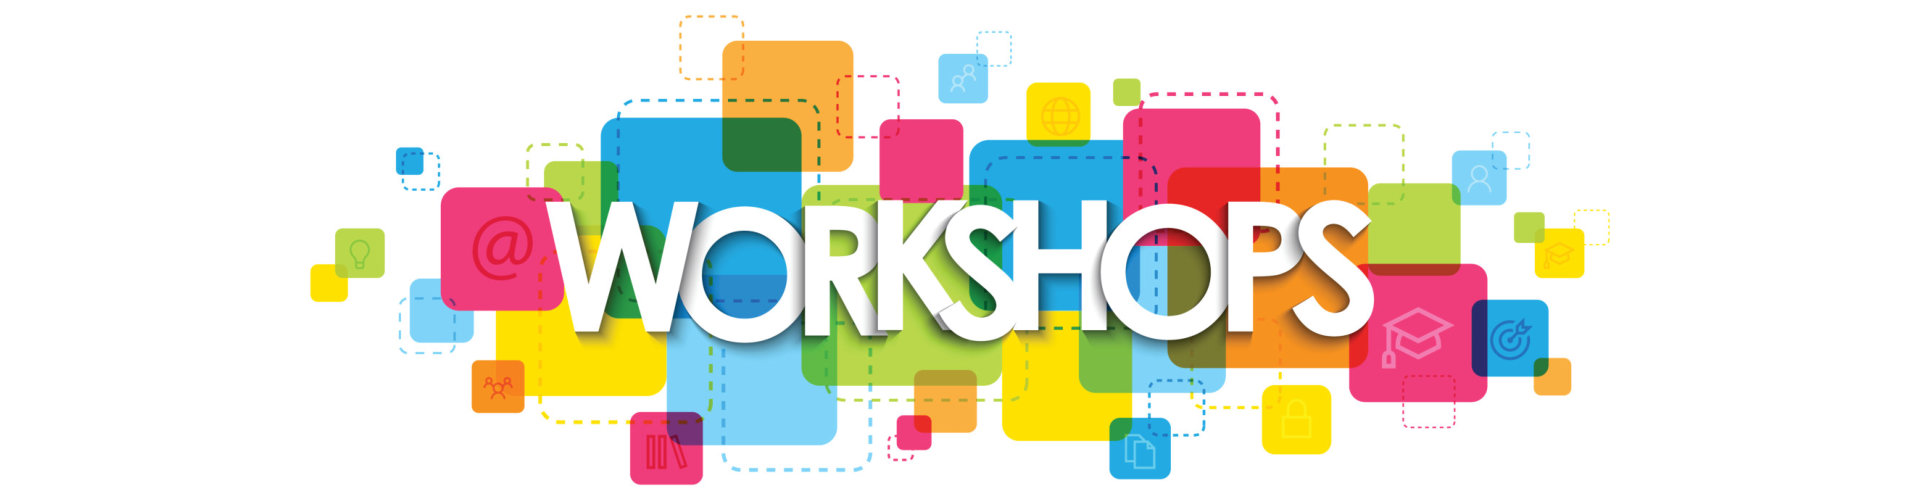 WORKSHOPS vector typography banner on colorful squares